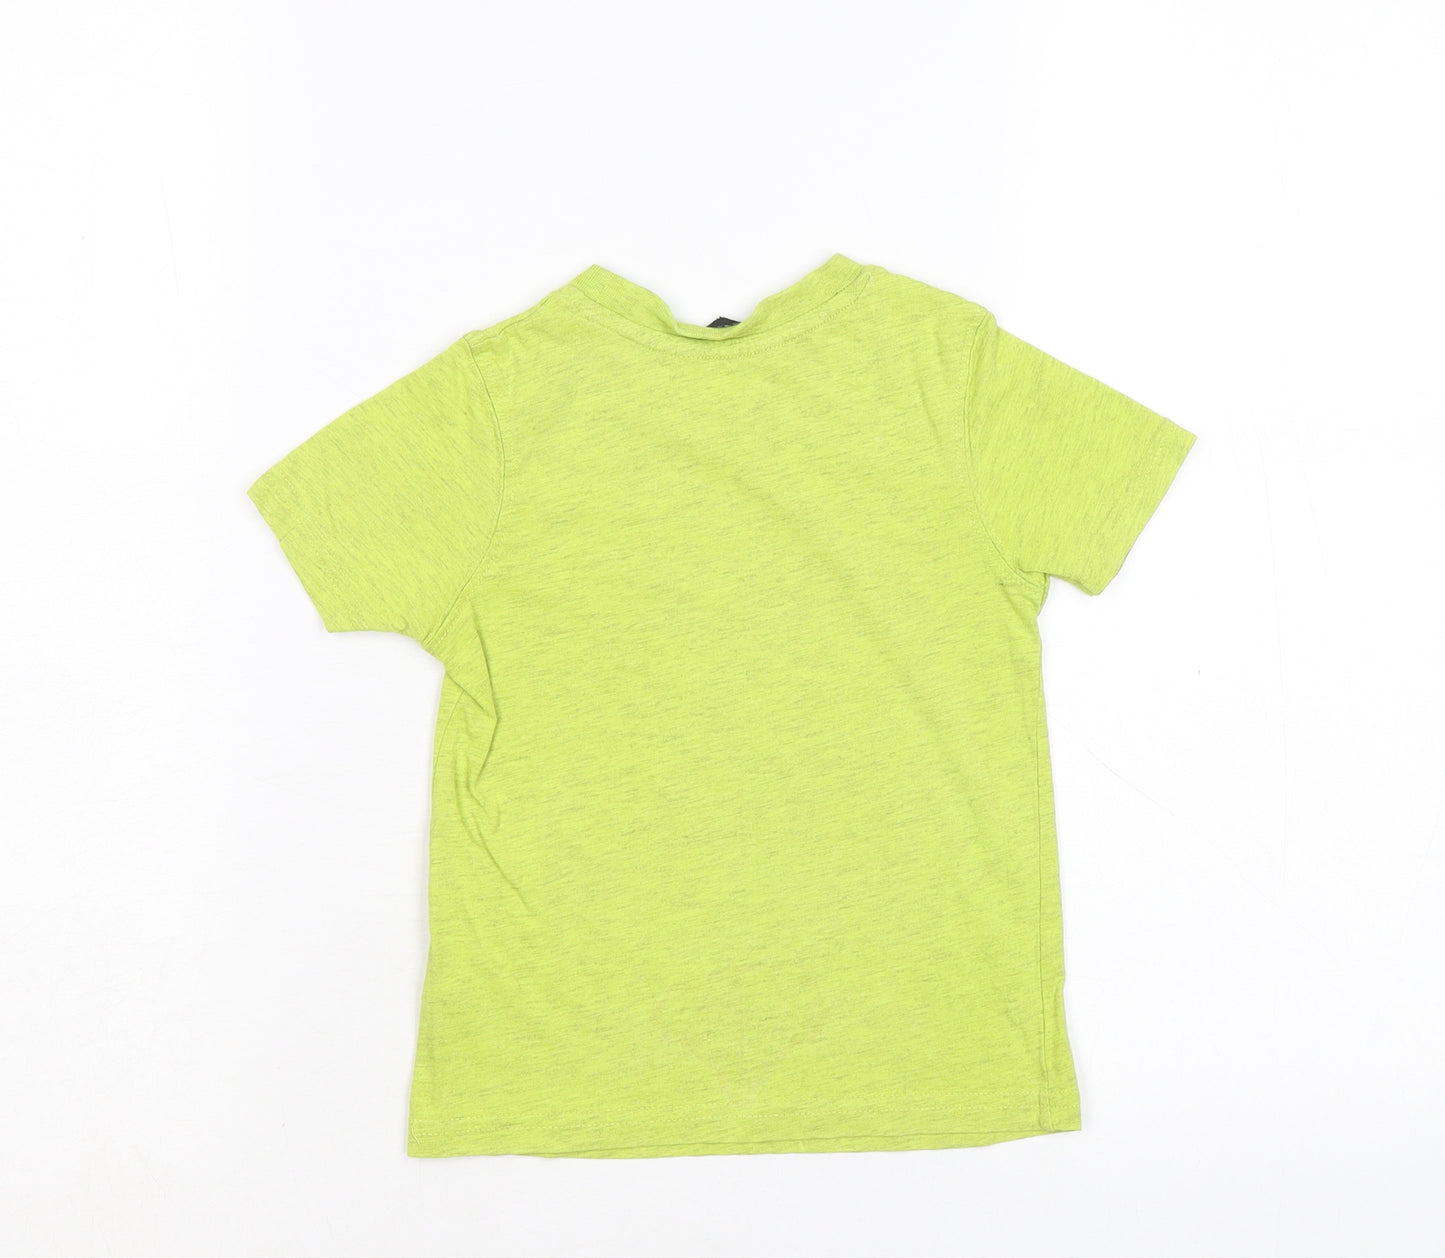 George Boys Green Cotton Basic T-Shirt Size 2-3 Years Round Neck Pullover - Boys on the run